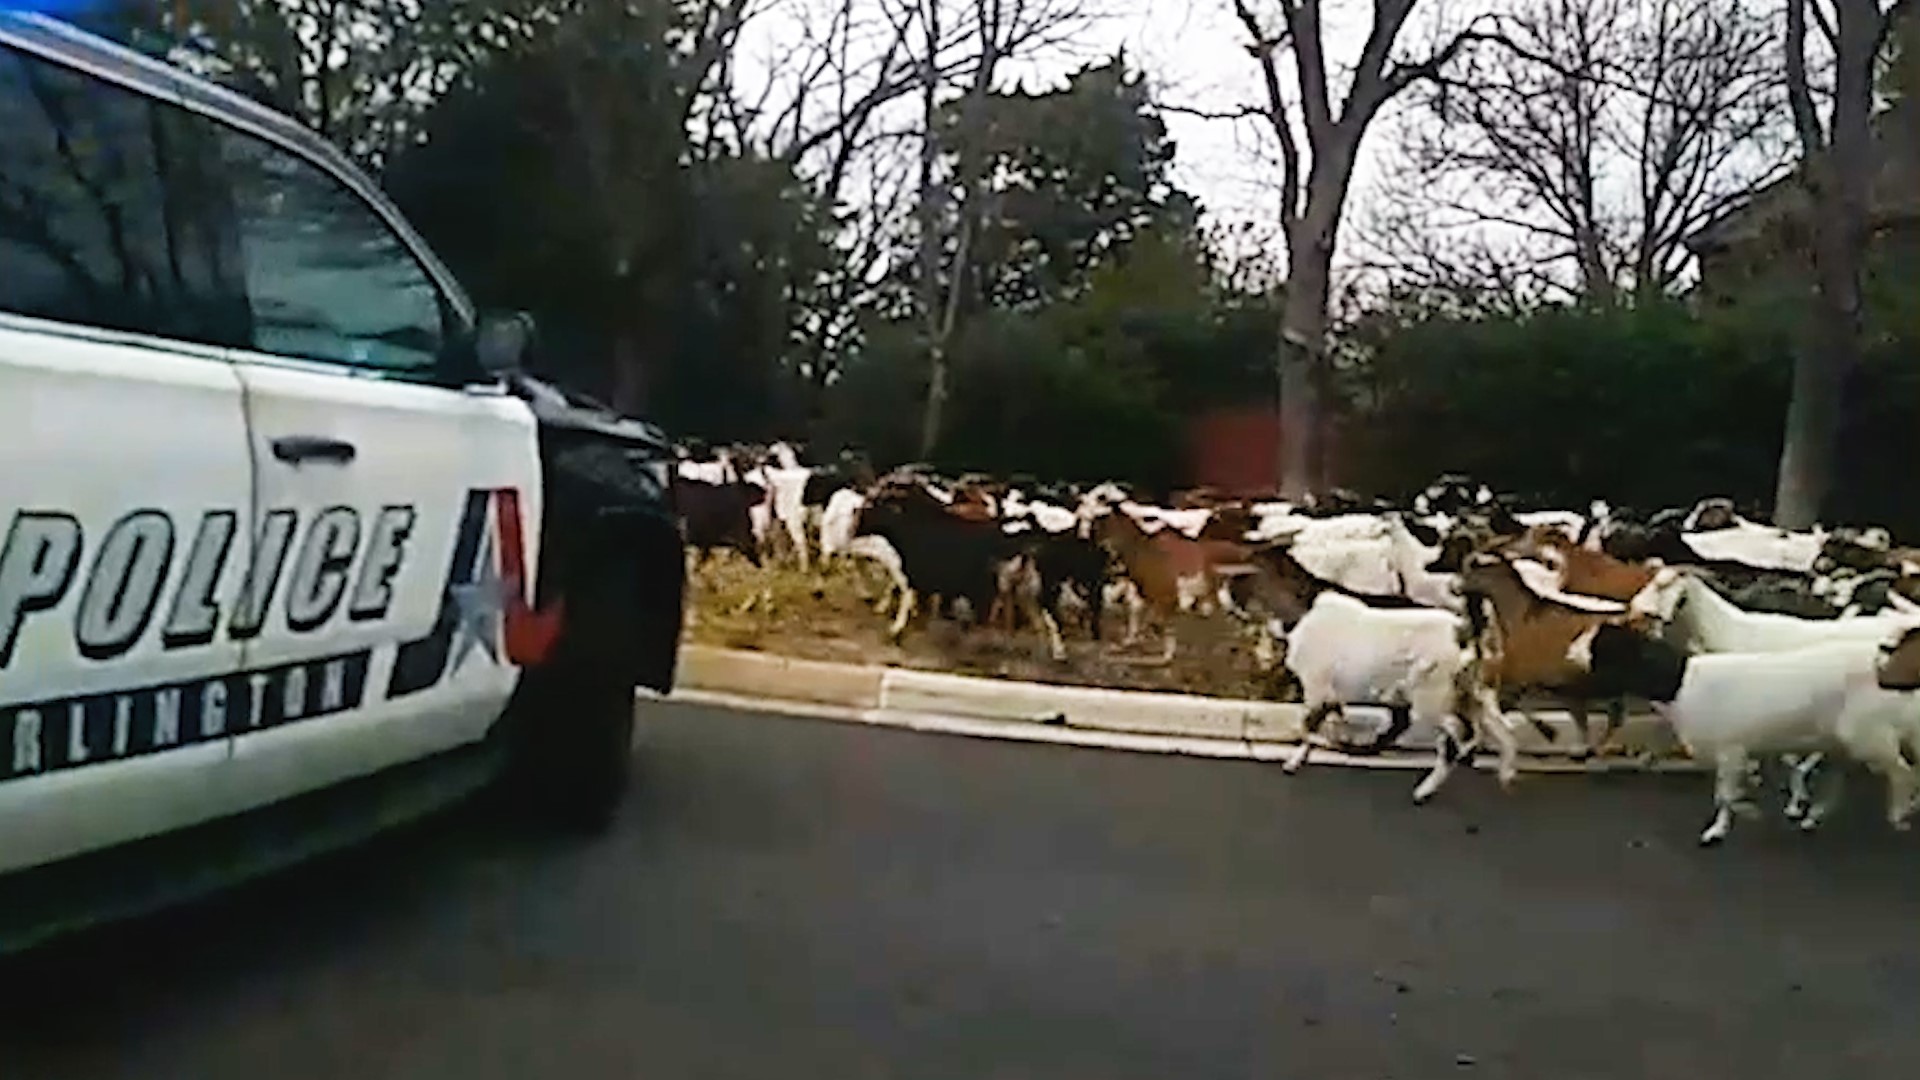 On Tuesday, Arlington police were notified that some goats escaped their enclosure and were wandering through a neighborhood.